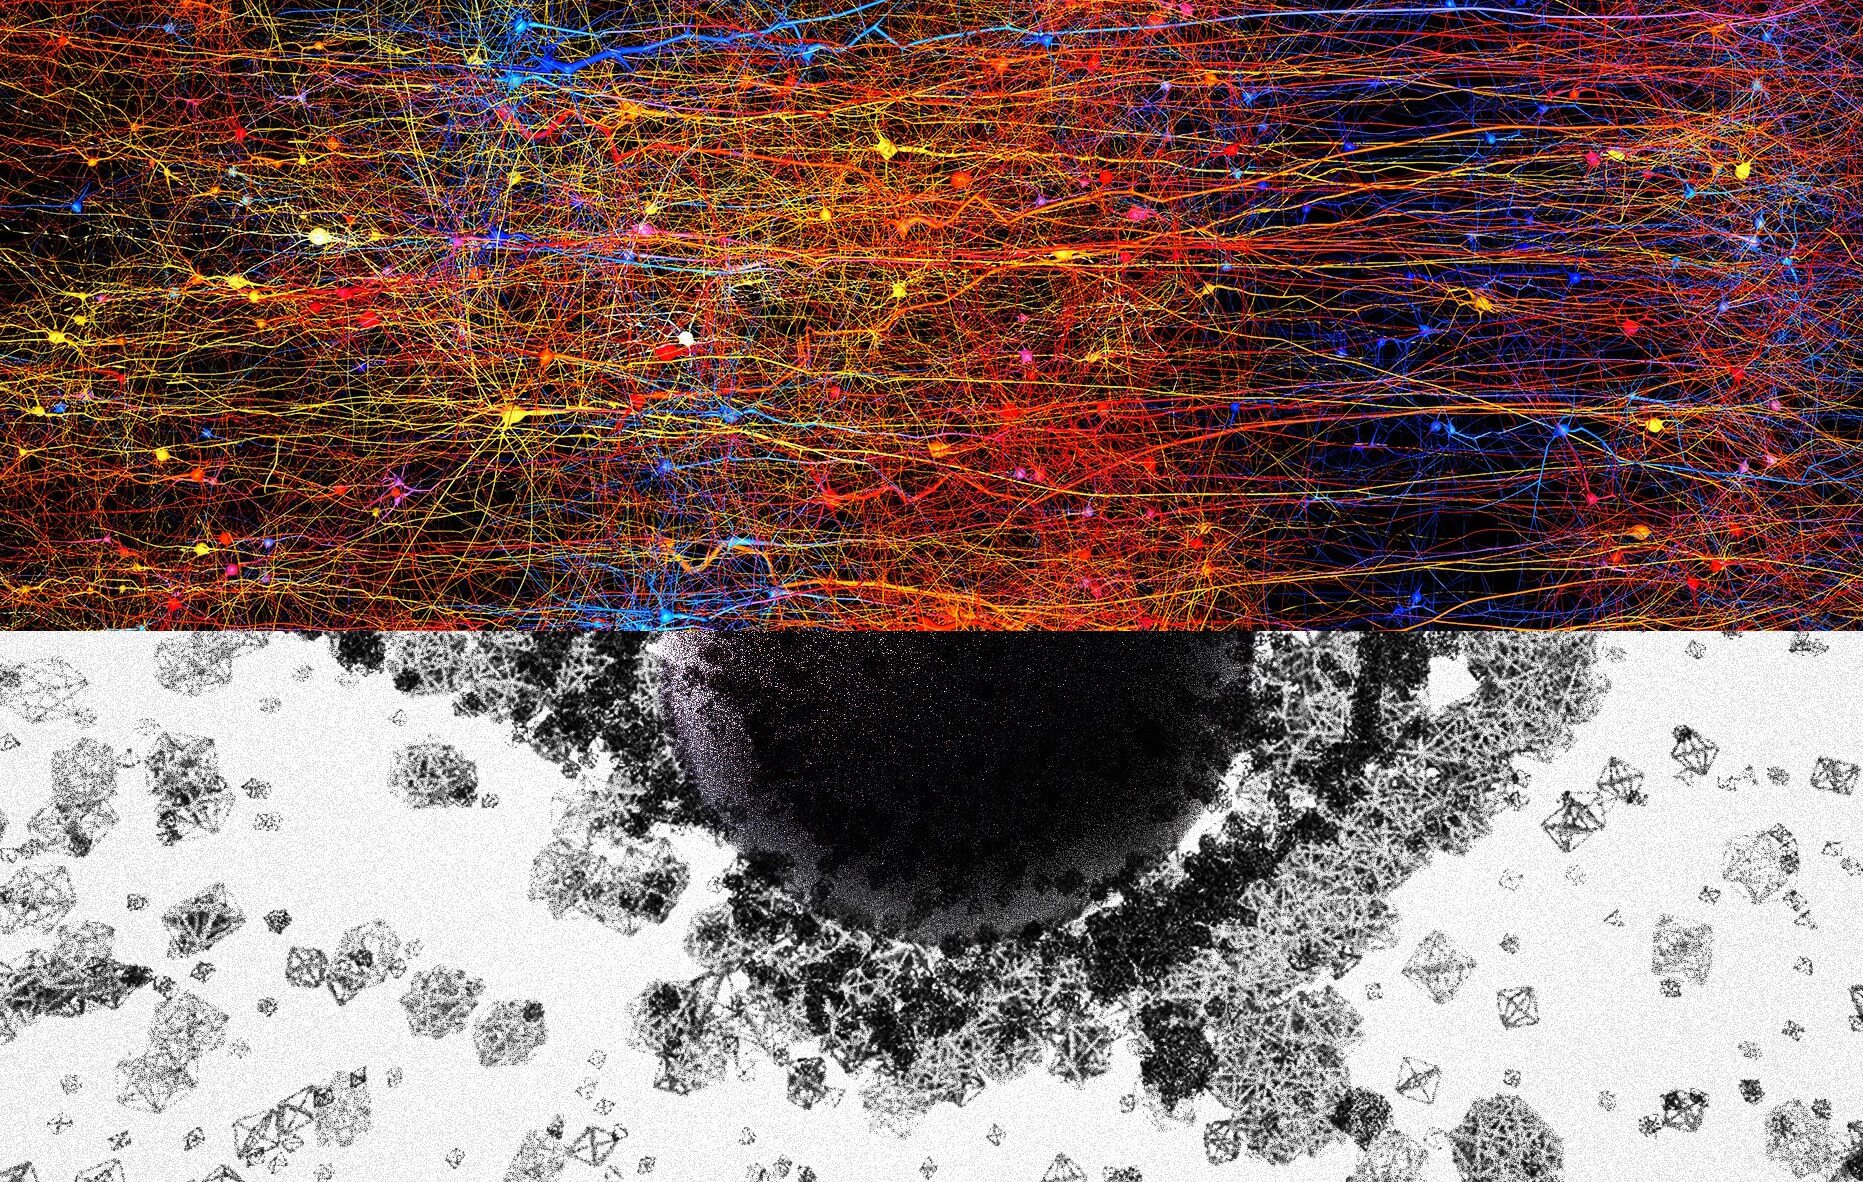 The brain builds a strange structure in 11 dimensions